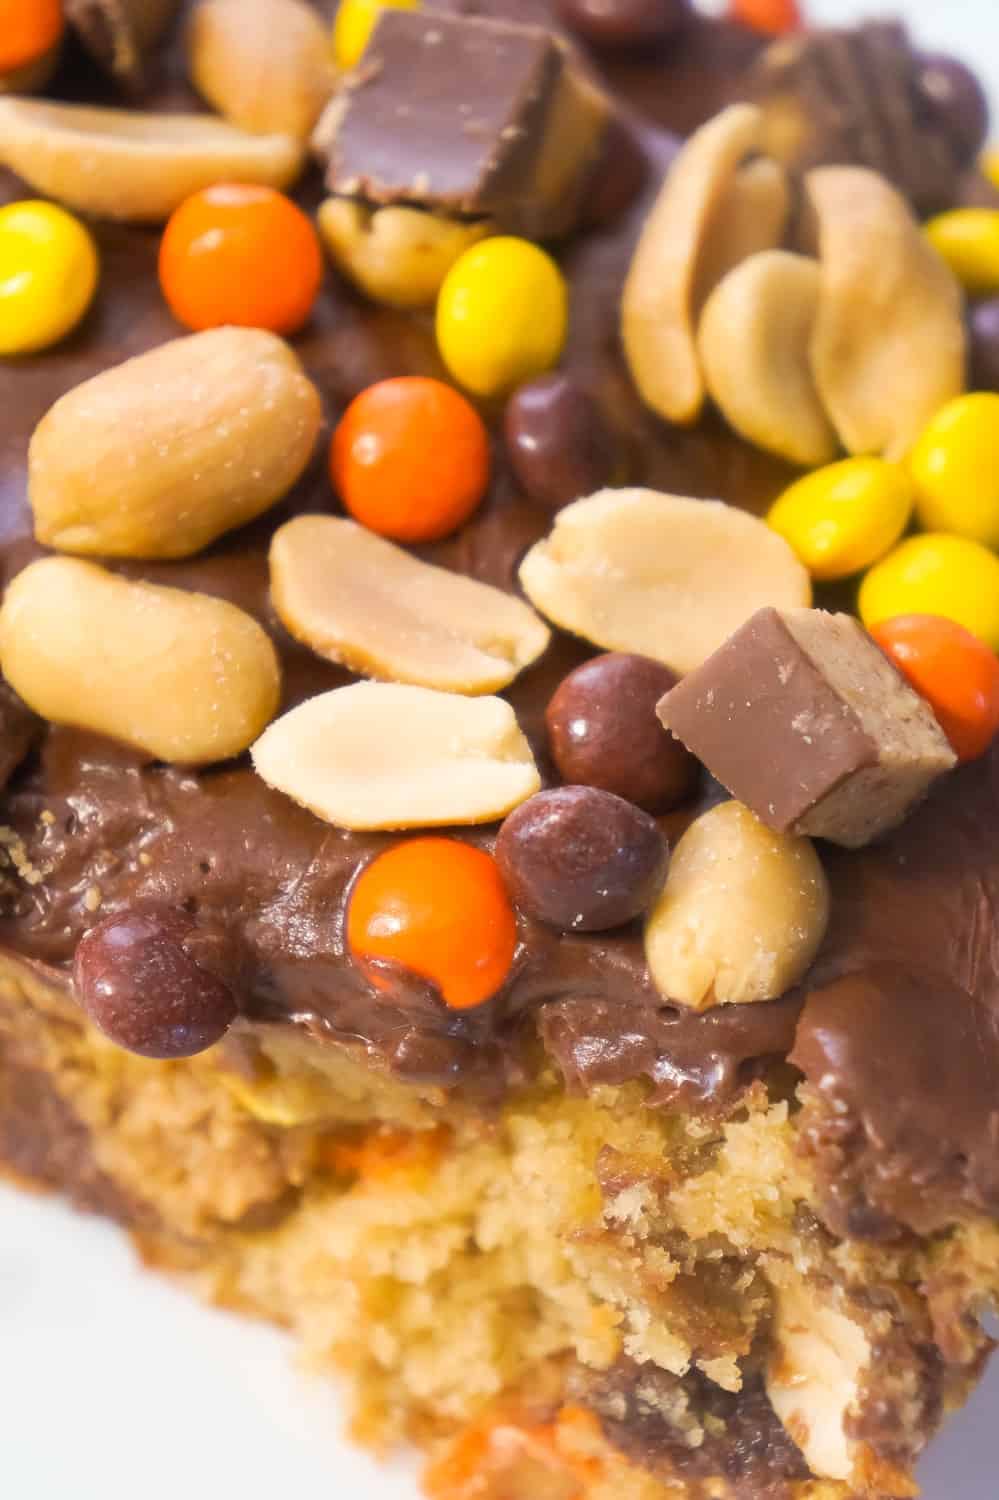 Ultimate Peanut Butter Banana Sheet cake is an easy chocolate peanut butter dessert recipe using boxed cake mix. This delicious cake is topped with chocolate frosting and loaded with peanut butter cups, Reese's Pieces and peanuts.